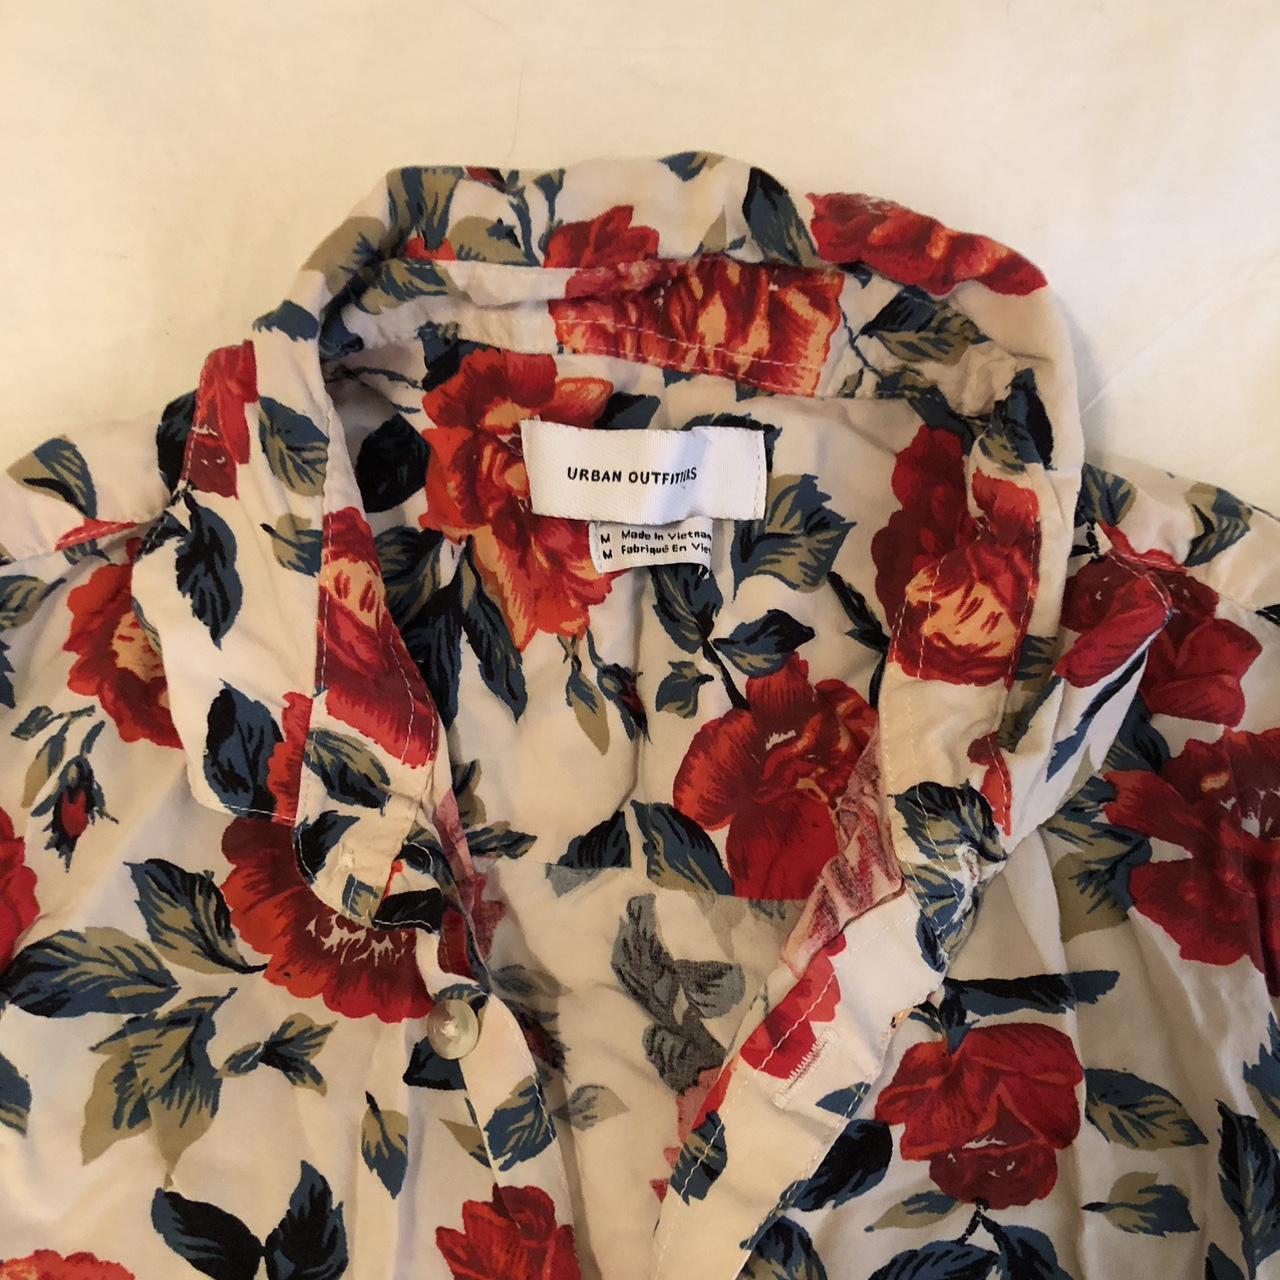 Urban Outfitters Men's Red and Cream Shirt | Depop